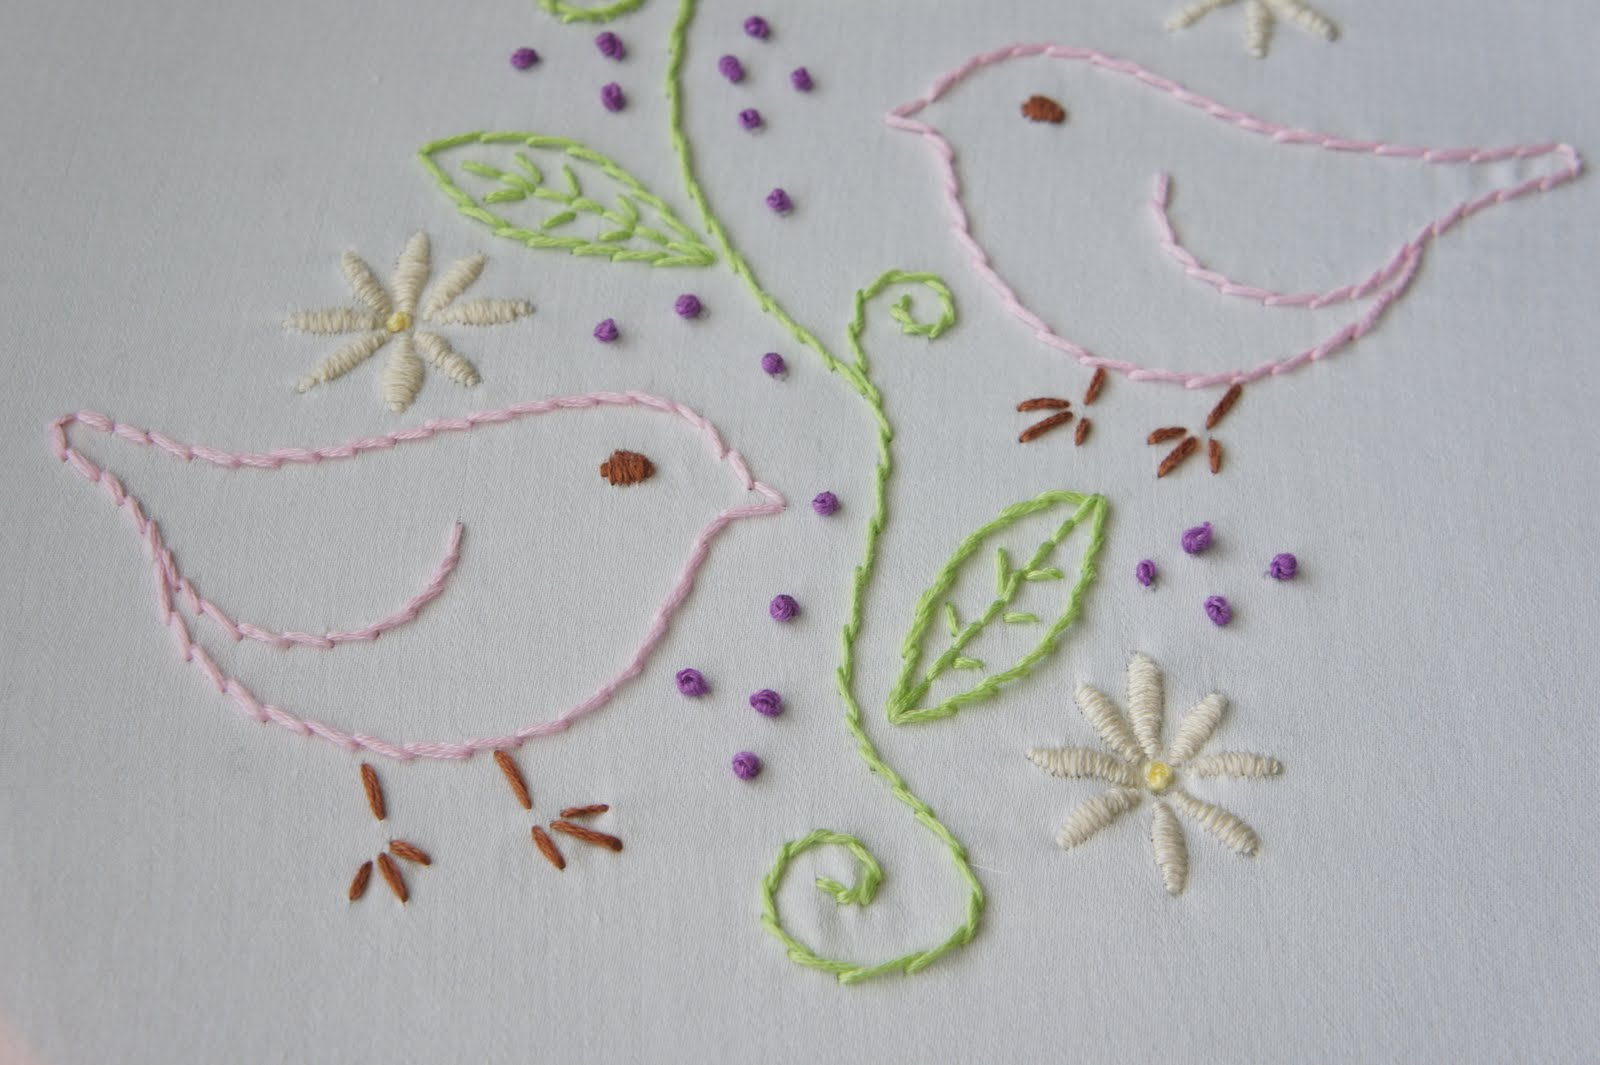 Embroidery By Hand Patterns Embroidery Hand Pattern My Patterns Embroidery Patterns Hand